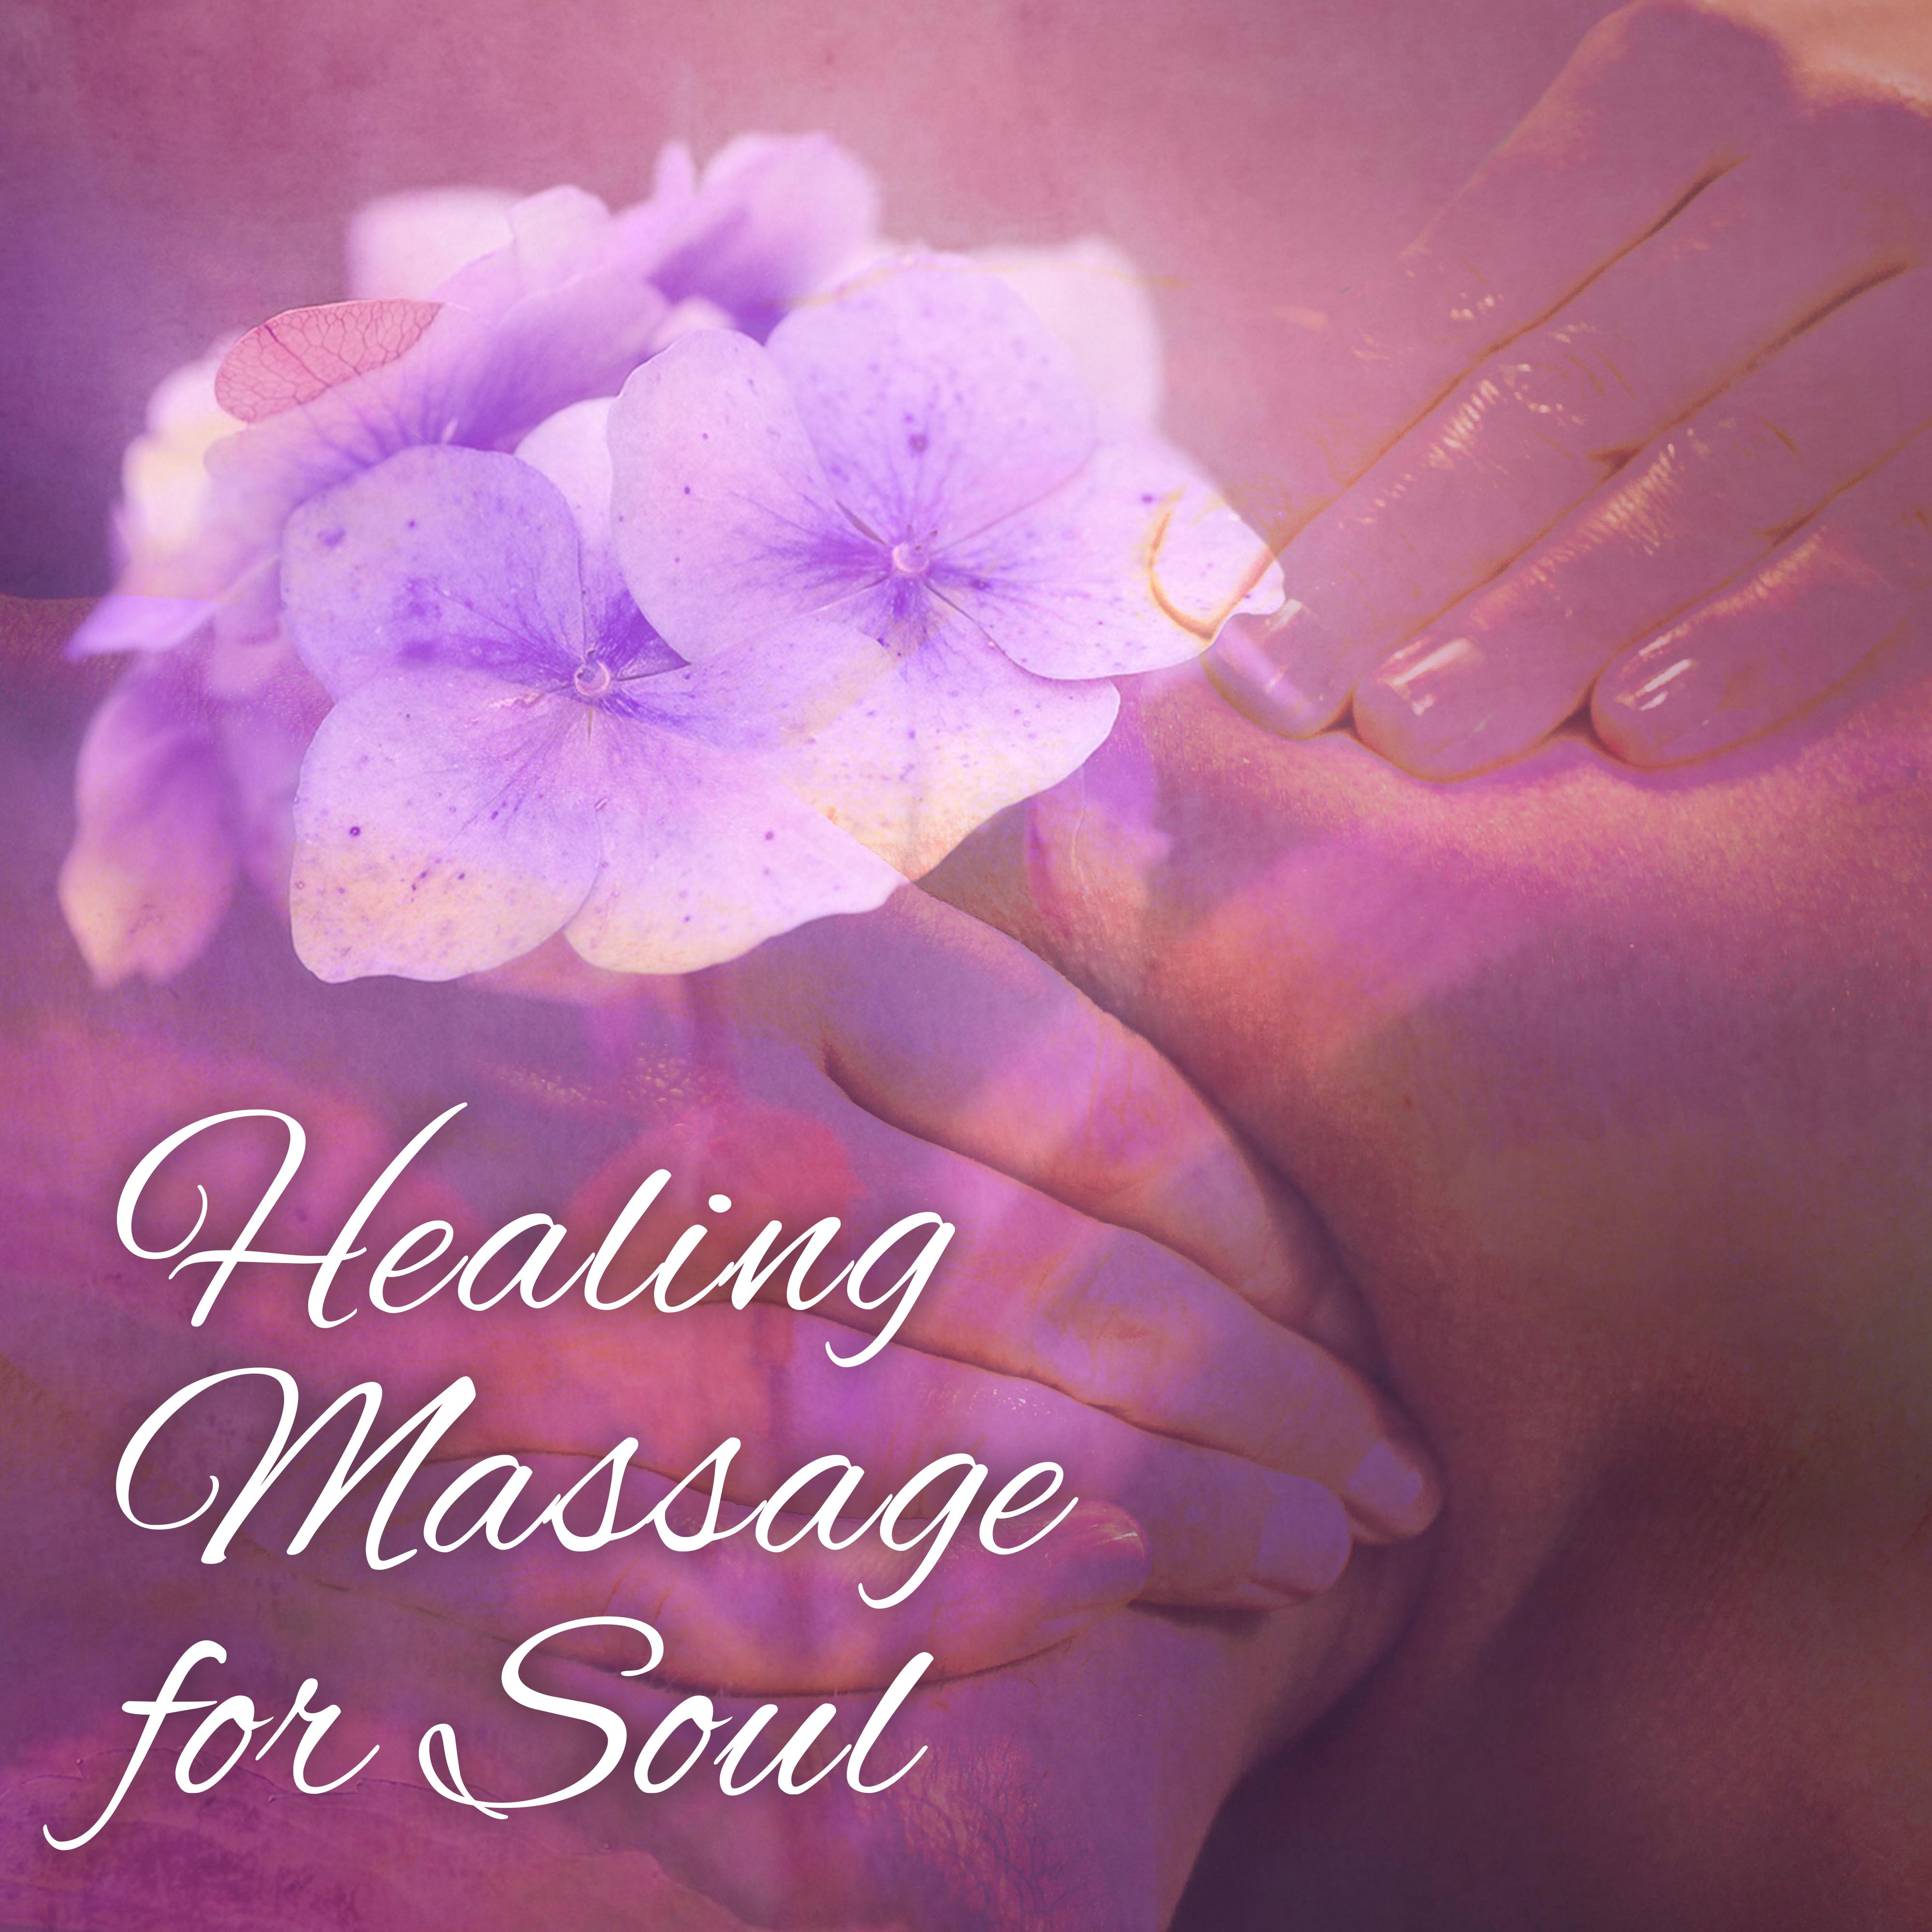 Healing Massage for Soul – Music for Spa, Wellness, Nature Sounds for Relaxation, Asian Music, Pure Waves, Soothing Piano